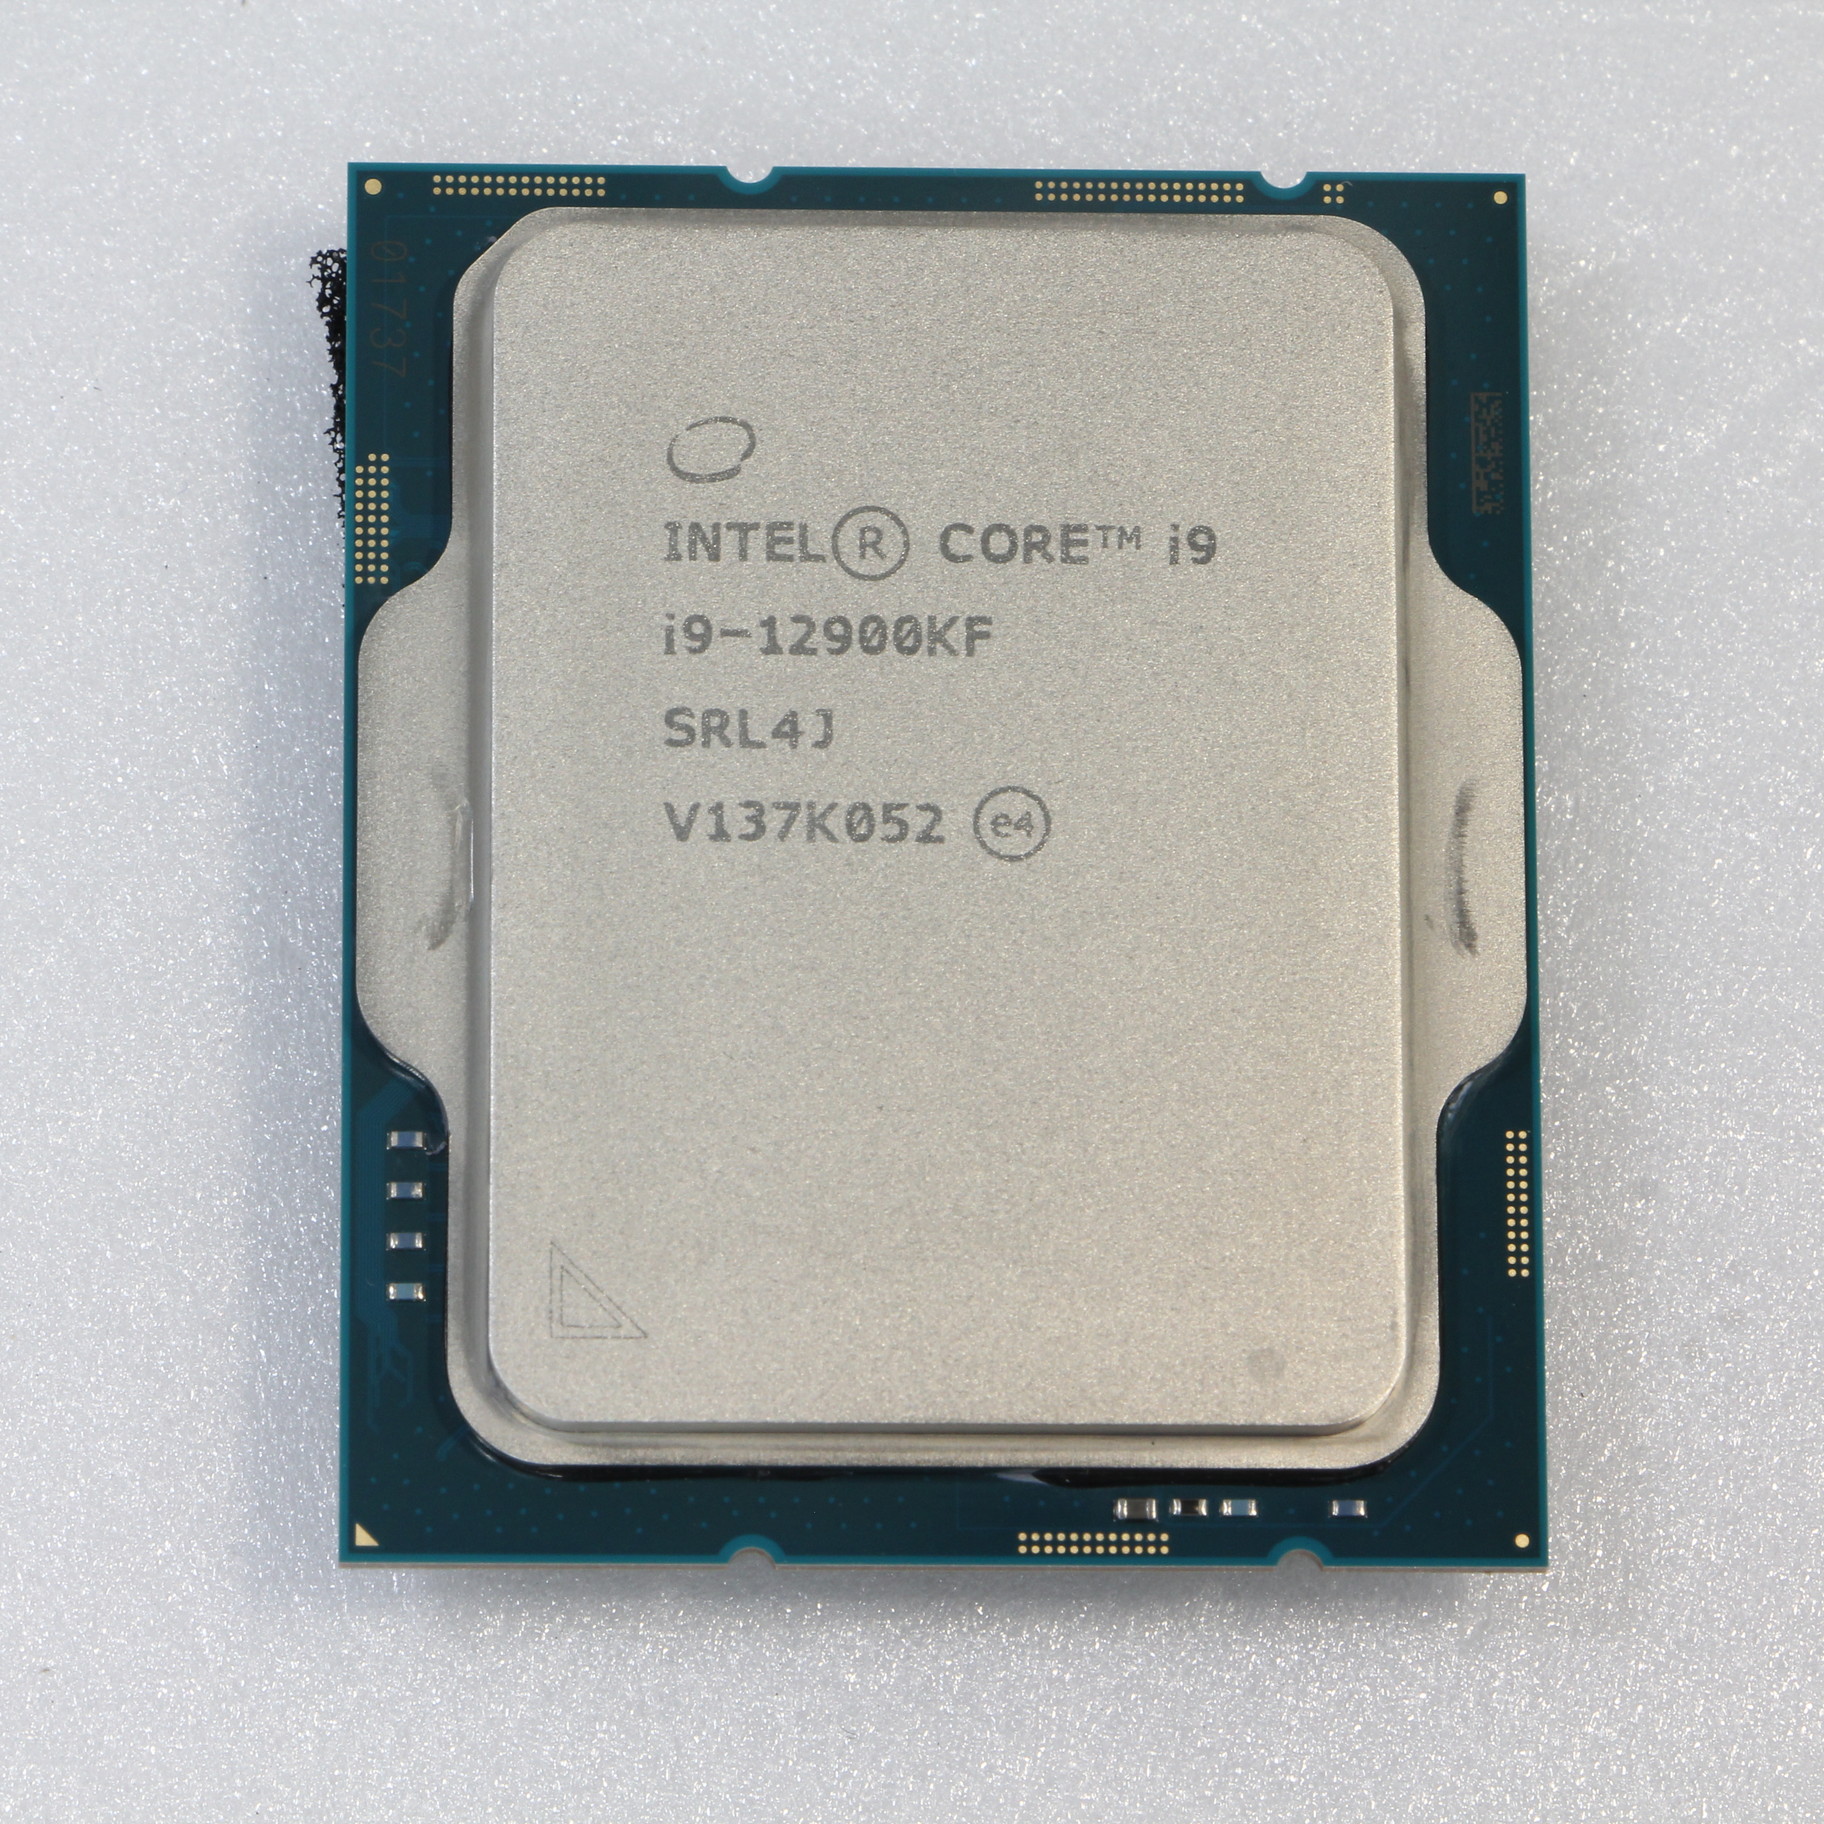 CPU Intel Corei9 プロセッサー 12900K 3.2GHz 最大 5.2GHz 第12世代